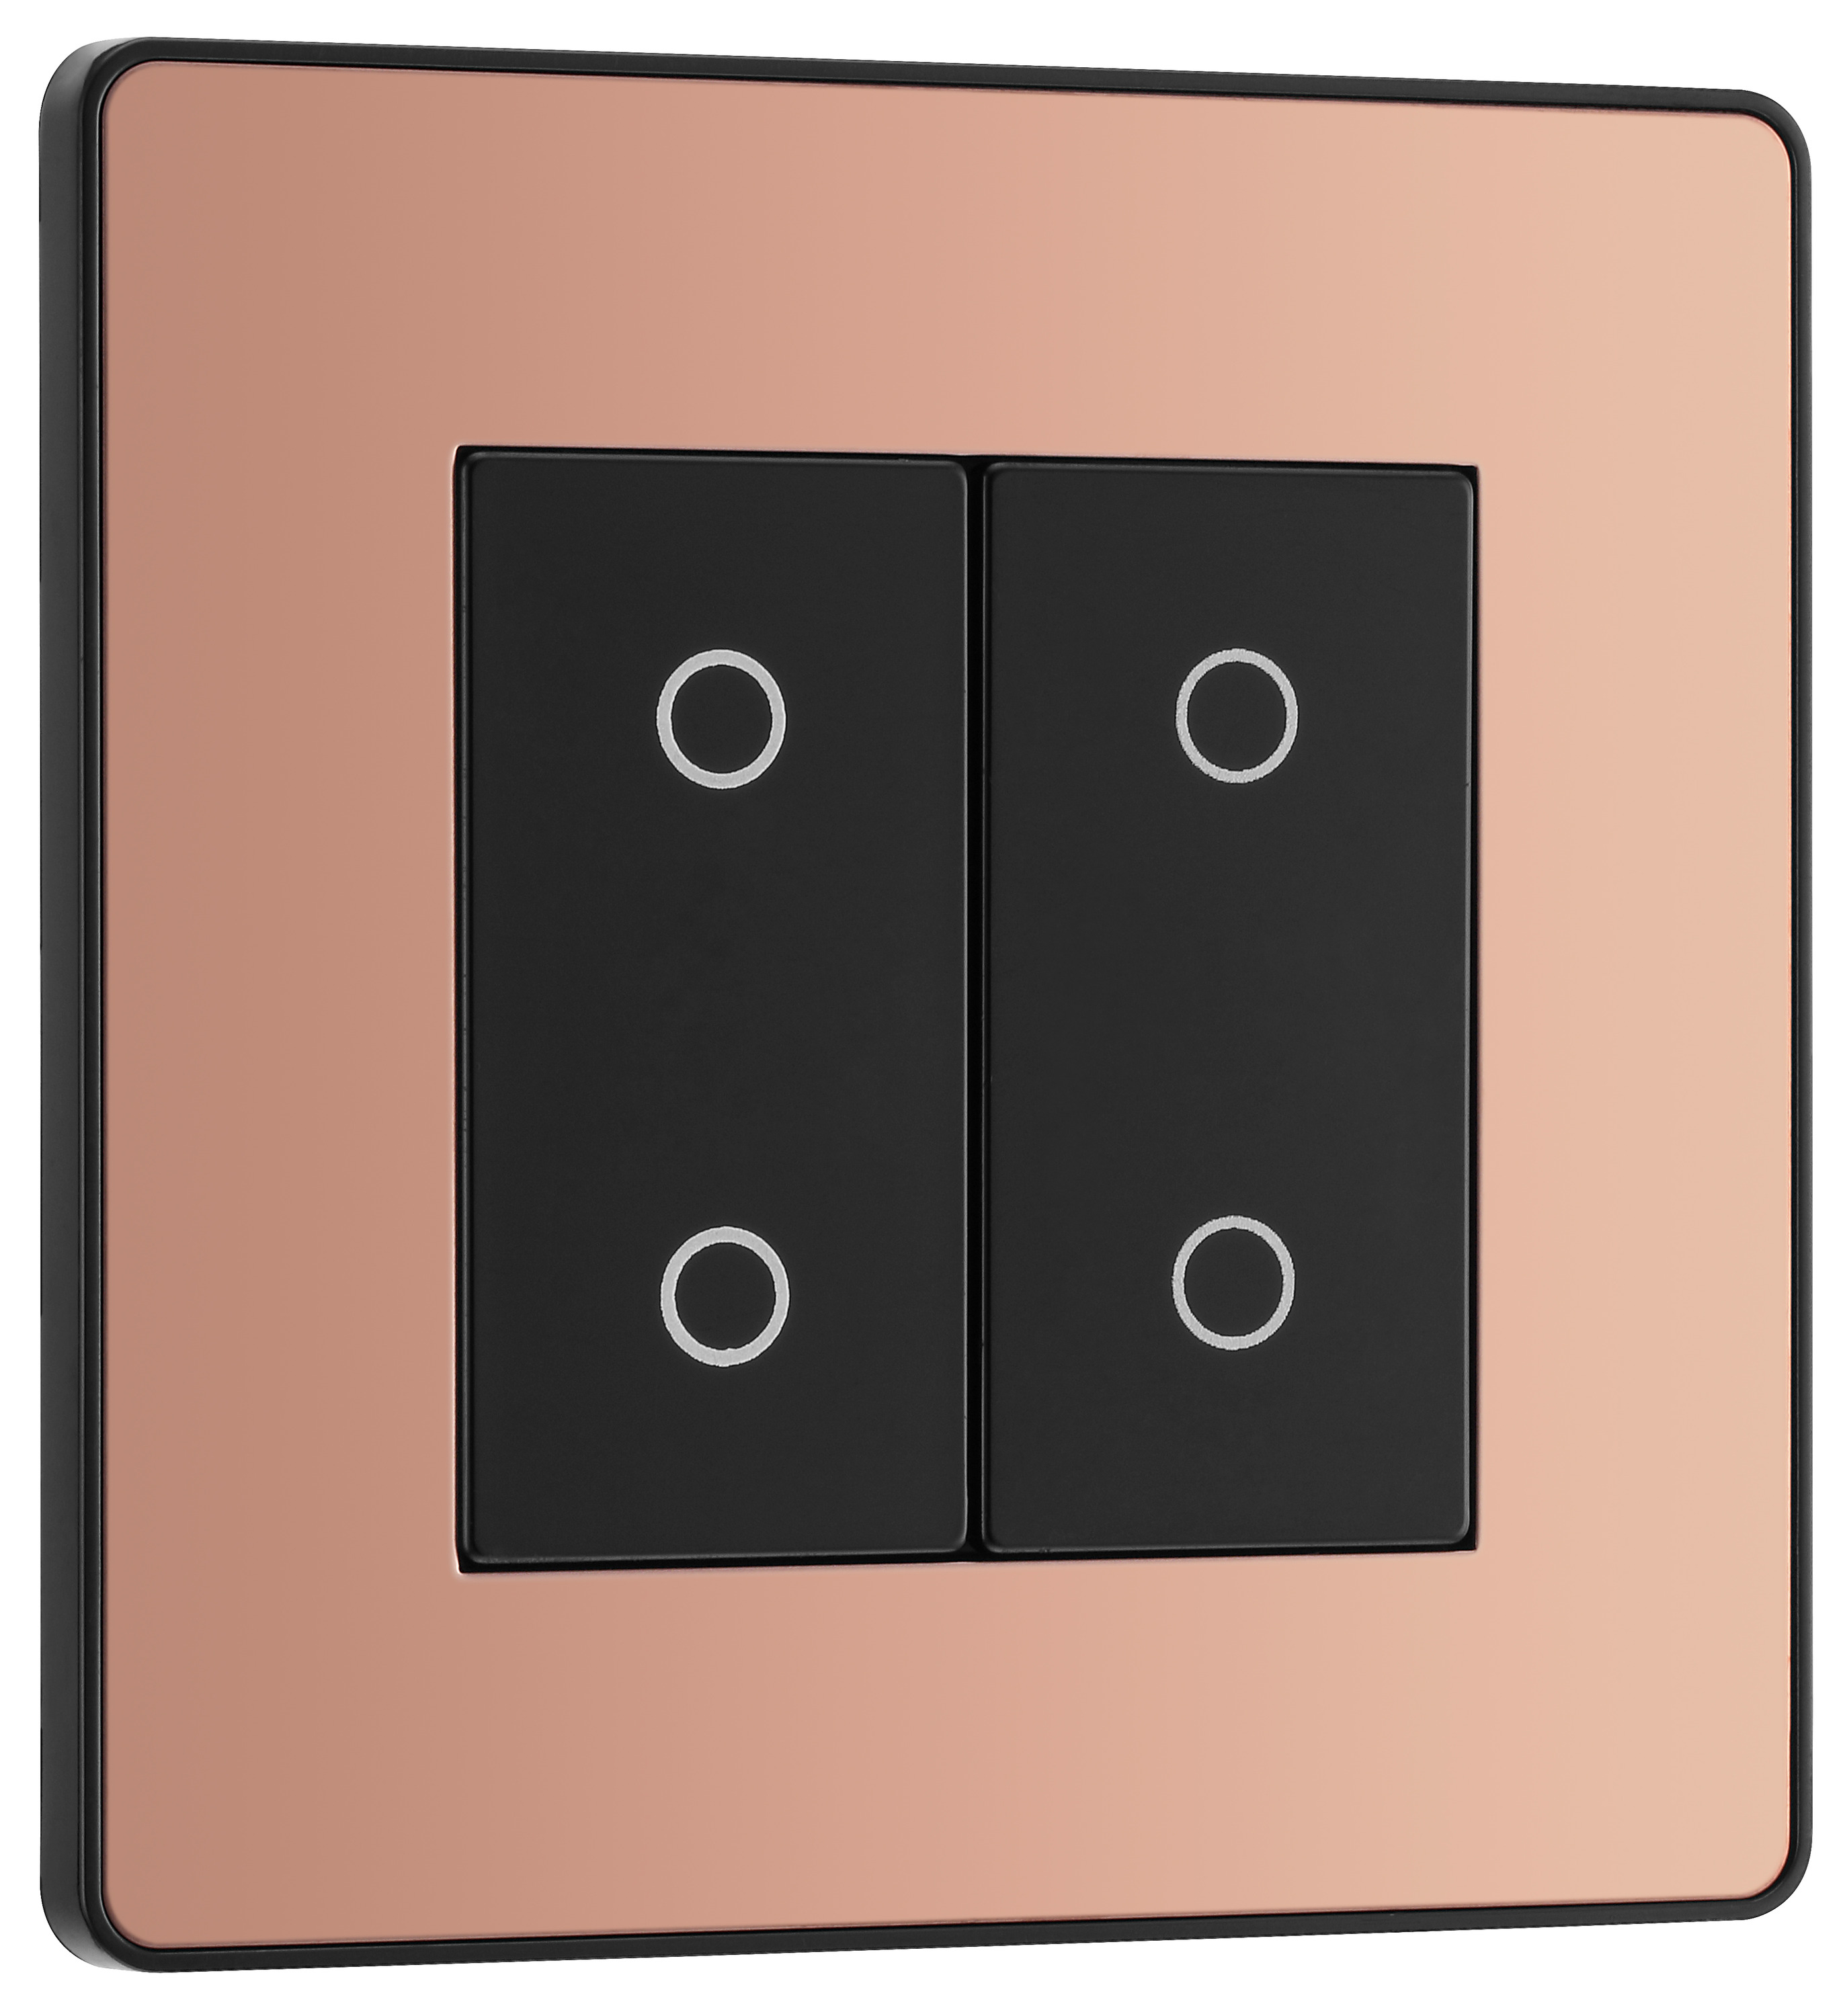 BG Evolve Secondary Polished Copper 2 Way Double Touch Dimmer Switch - 200W